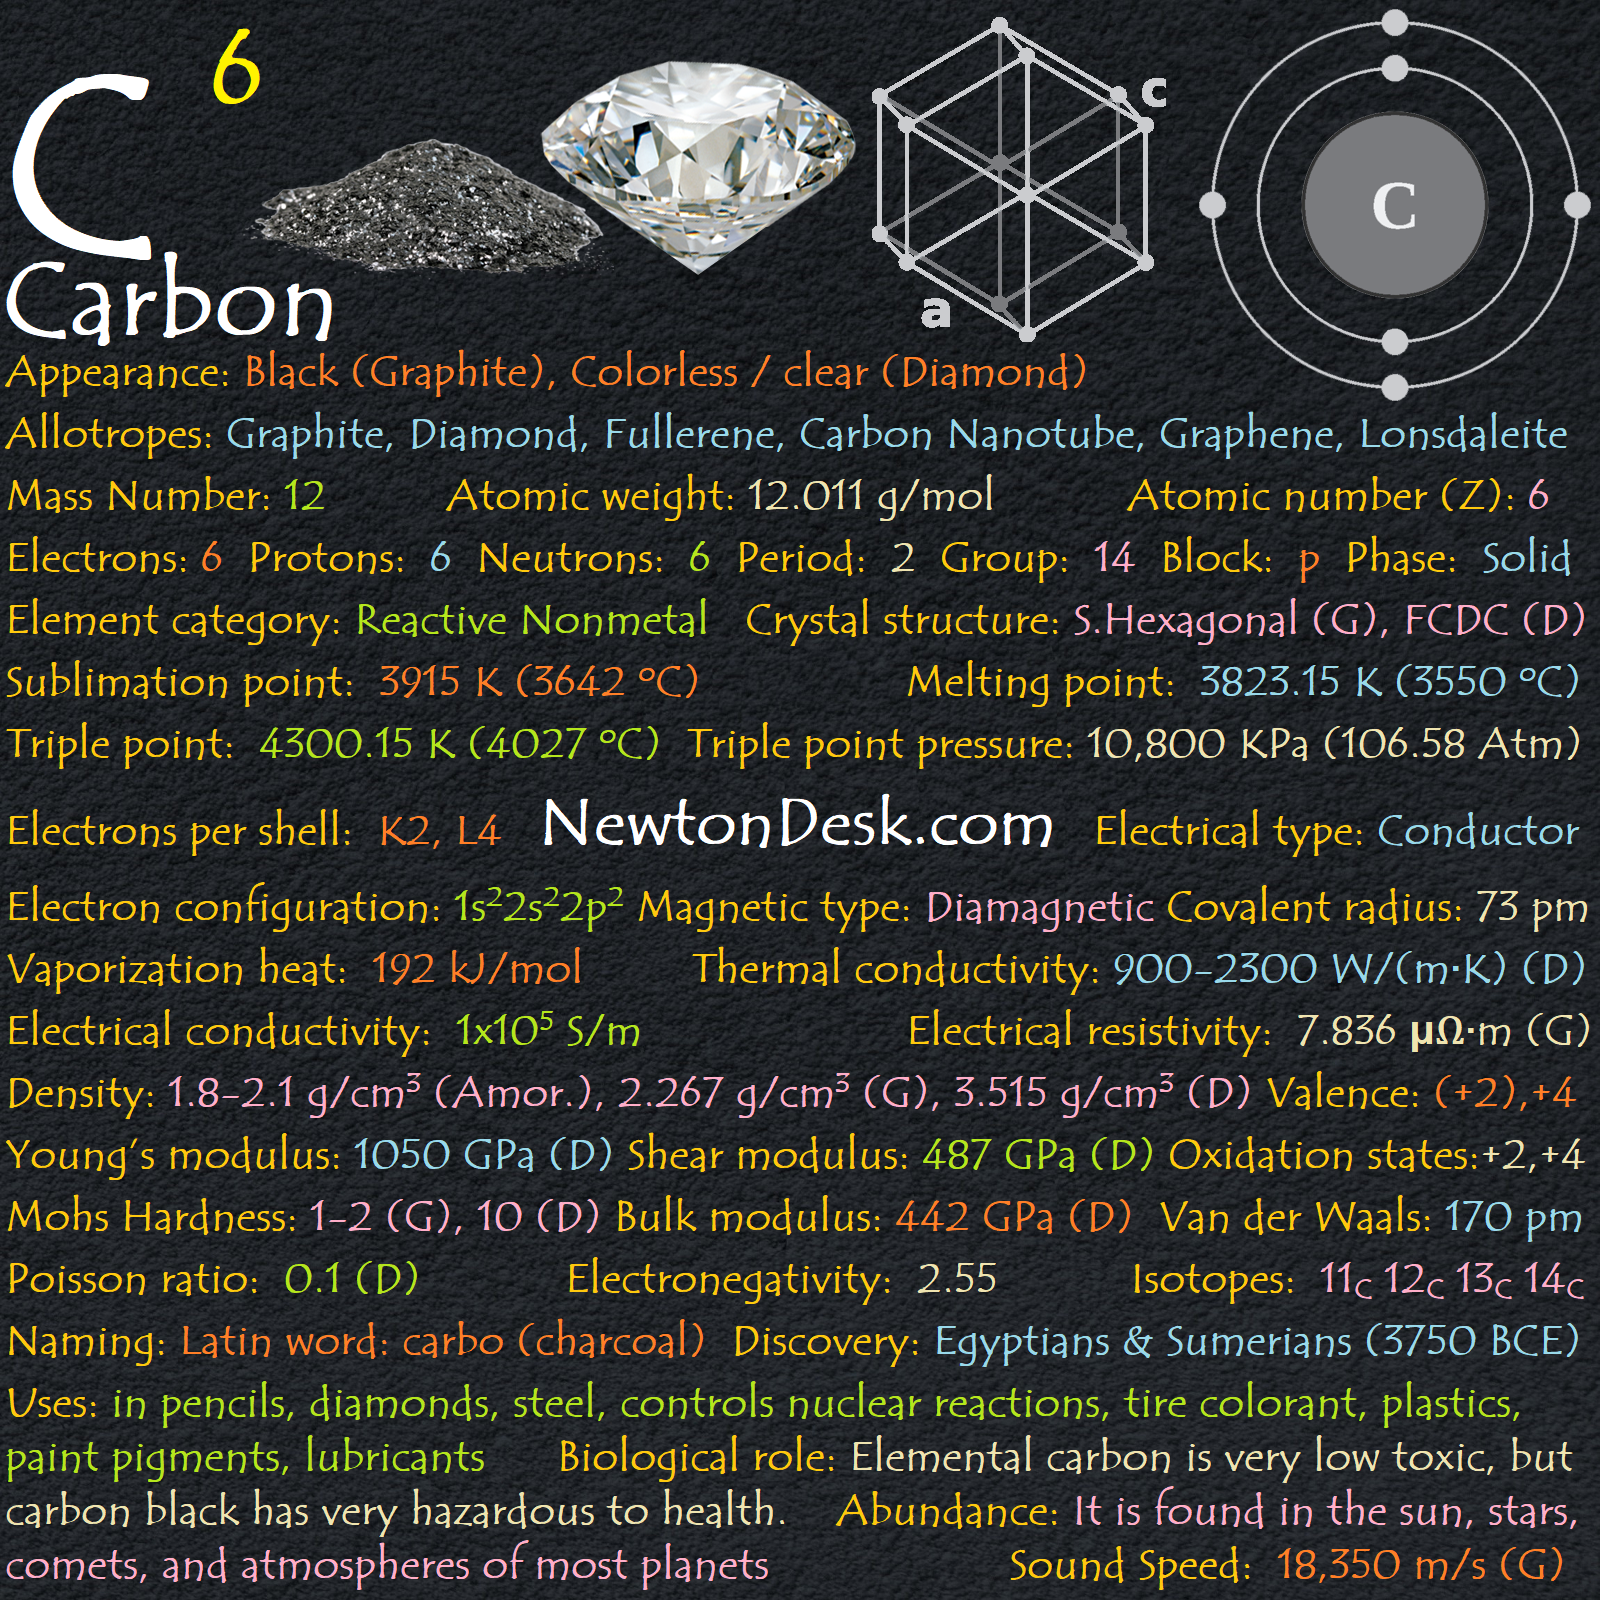 Carbon: Facts about an element that is a key ingredient for life on Earth